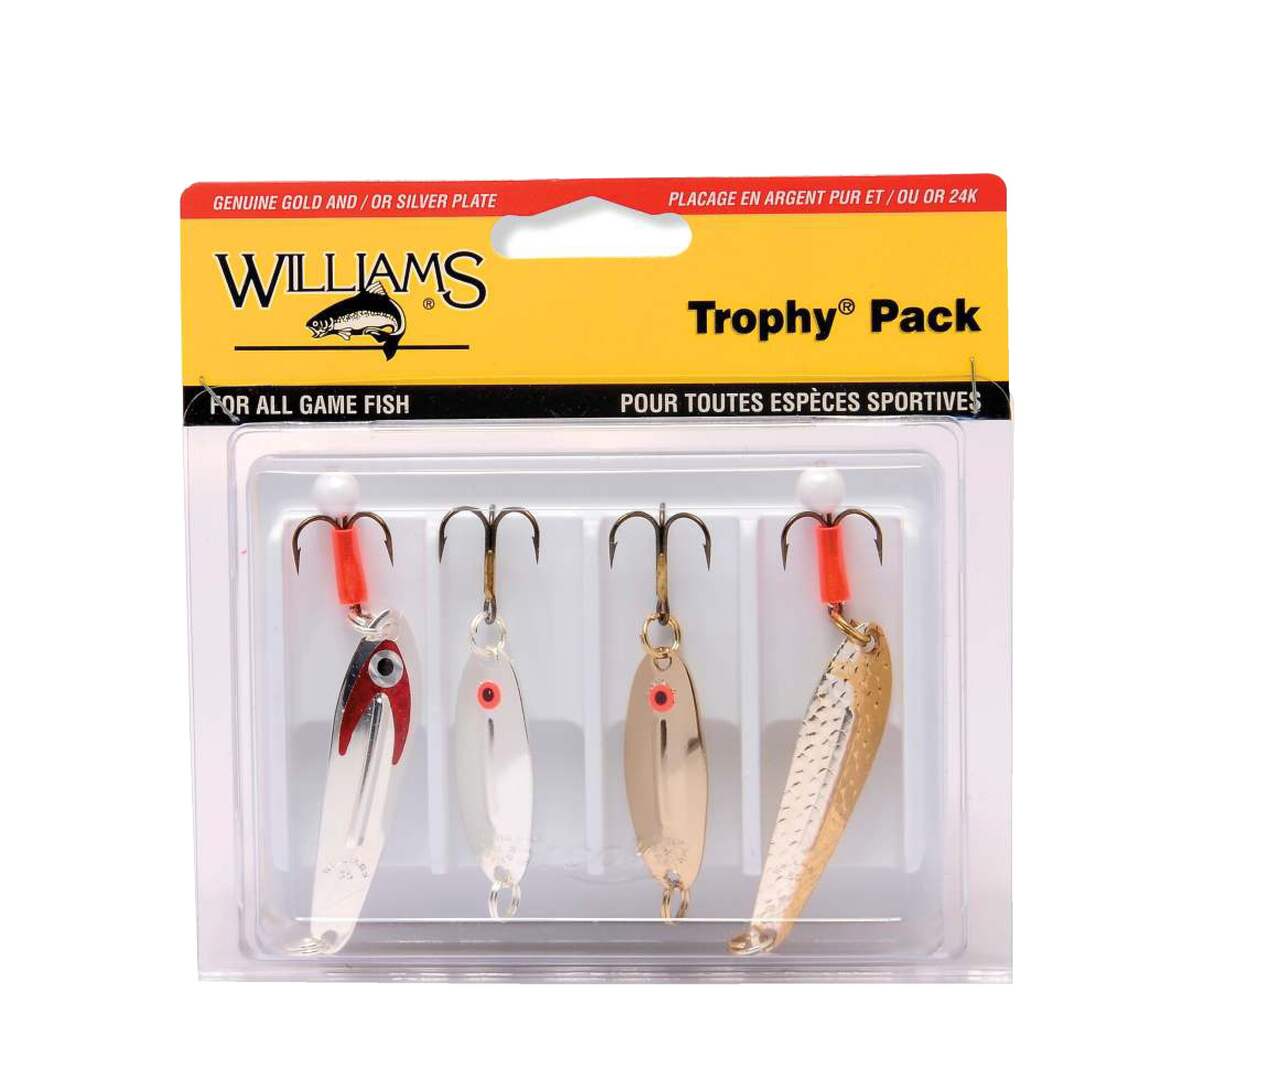 https://media-www.canadiantire.ca/product/playing/fishing/fishing-lures/0788270/ice-fishing-lure-williams-kit-f64d912d-4d89-43ca-9a72-12596f24a7d8-jpgrendition.jpg?imdensity=1&imwidth=640&impolicy=mZoom